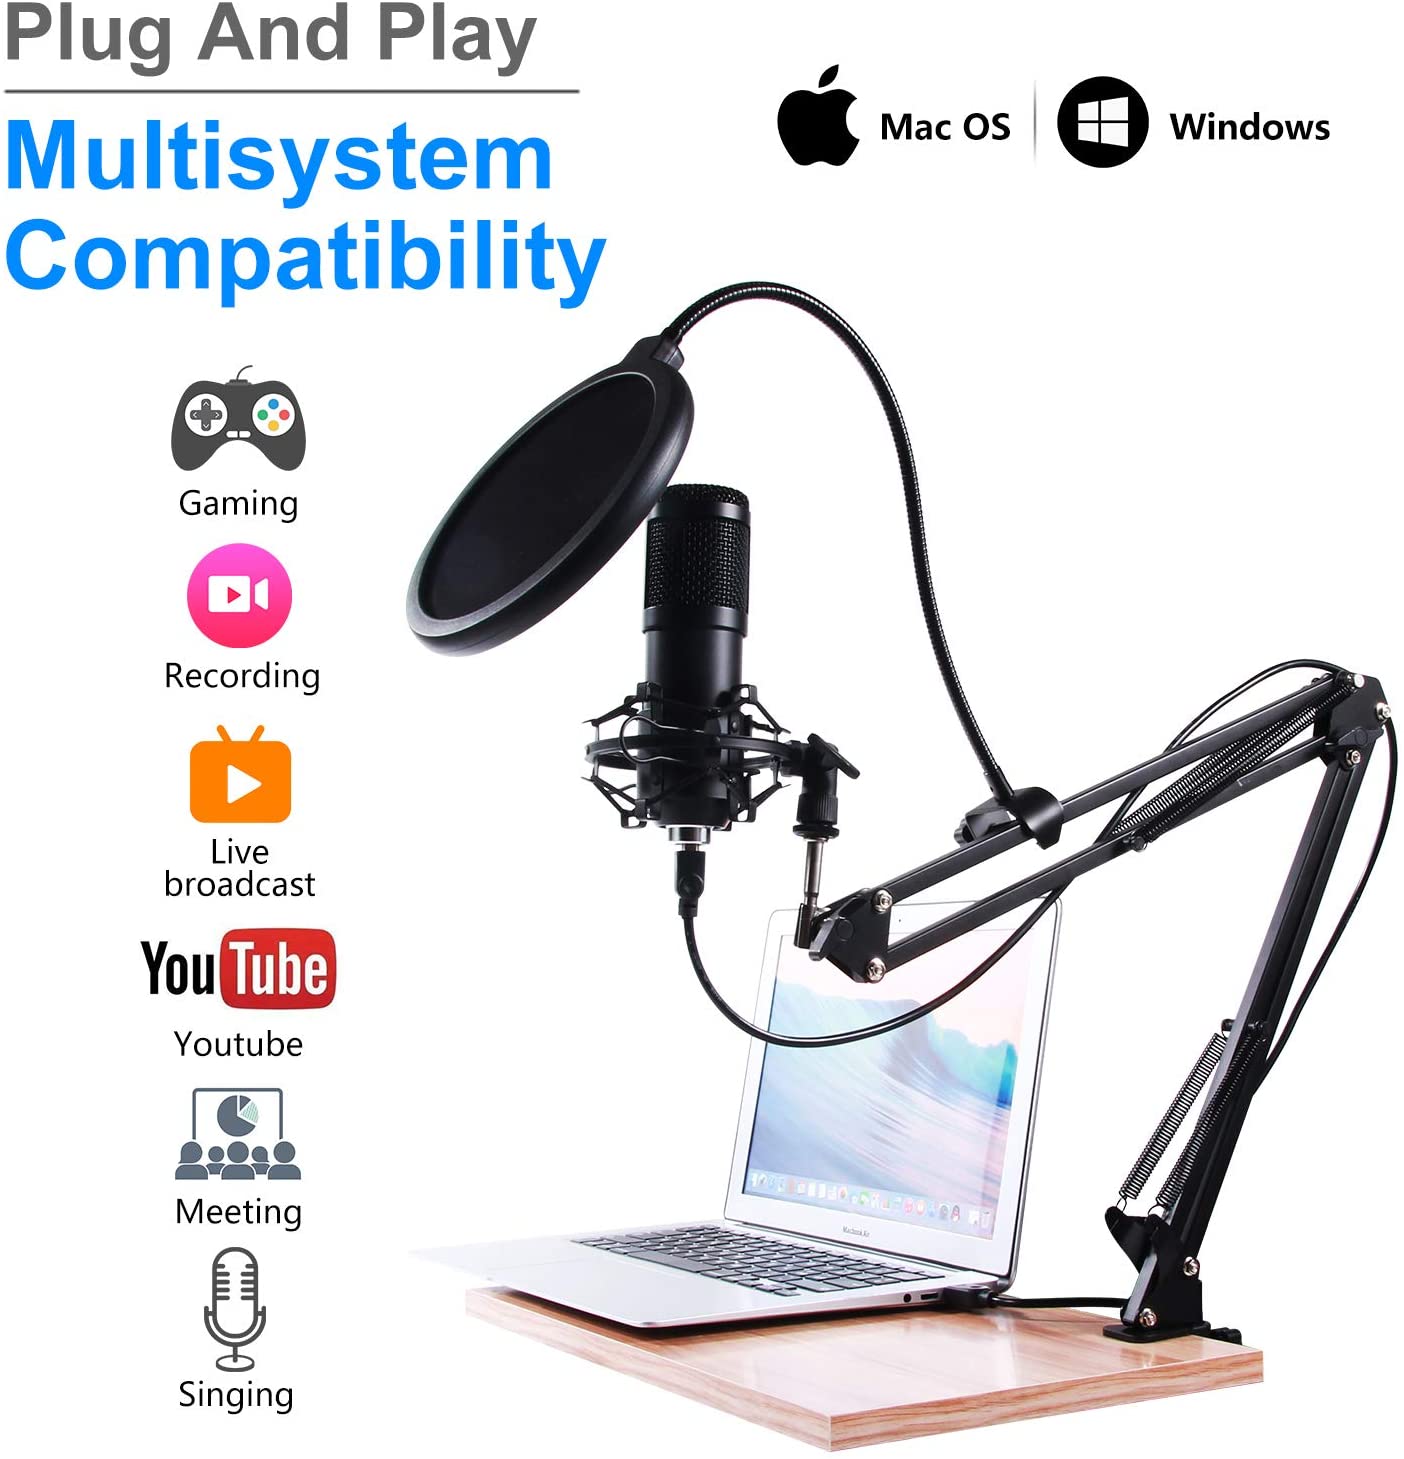 USB Condenser Microphone for Computer PC 192KHZ/24BIT Professional Cardioid Microphone Kit with Adjustable Scissor Arm Stand Shock Mount Pop Filter for Karaoke, YouTube, Gaming Recording - image 5 of 8